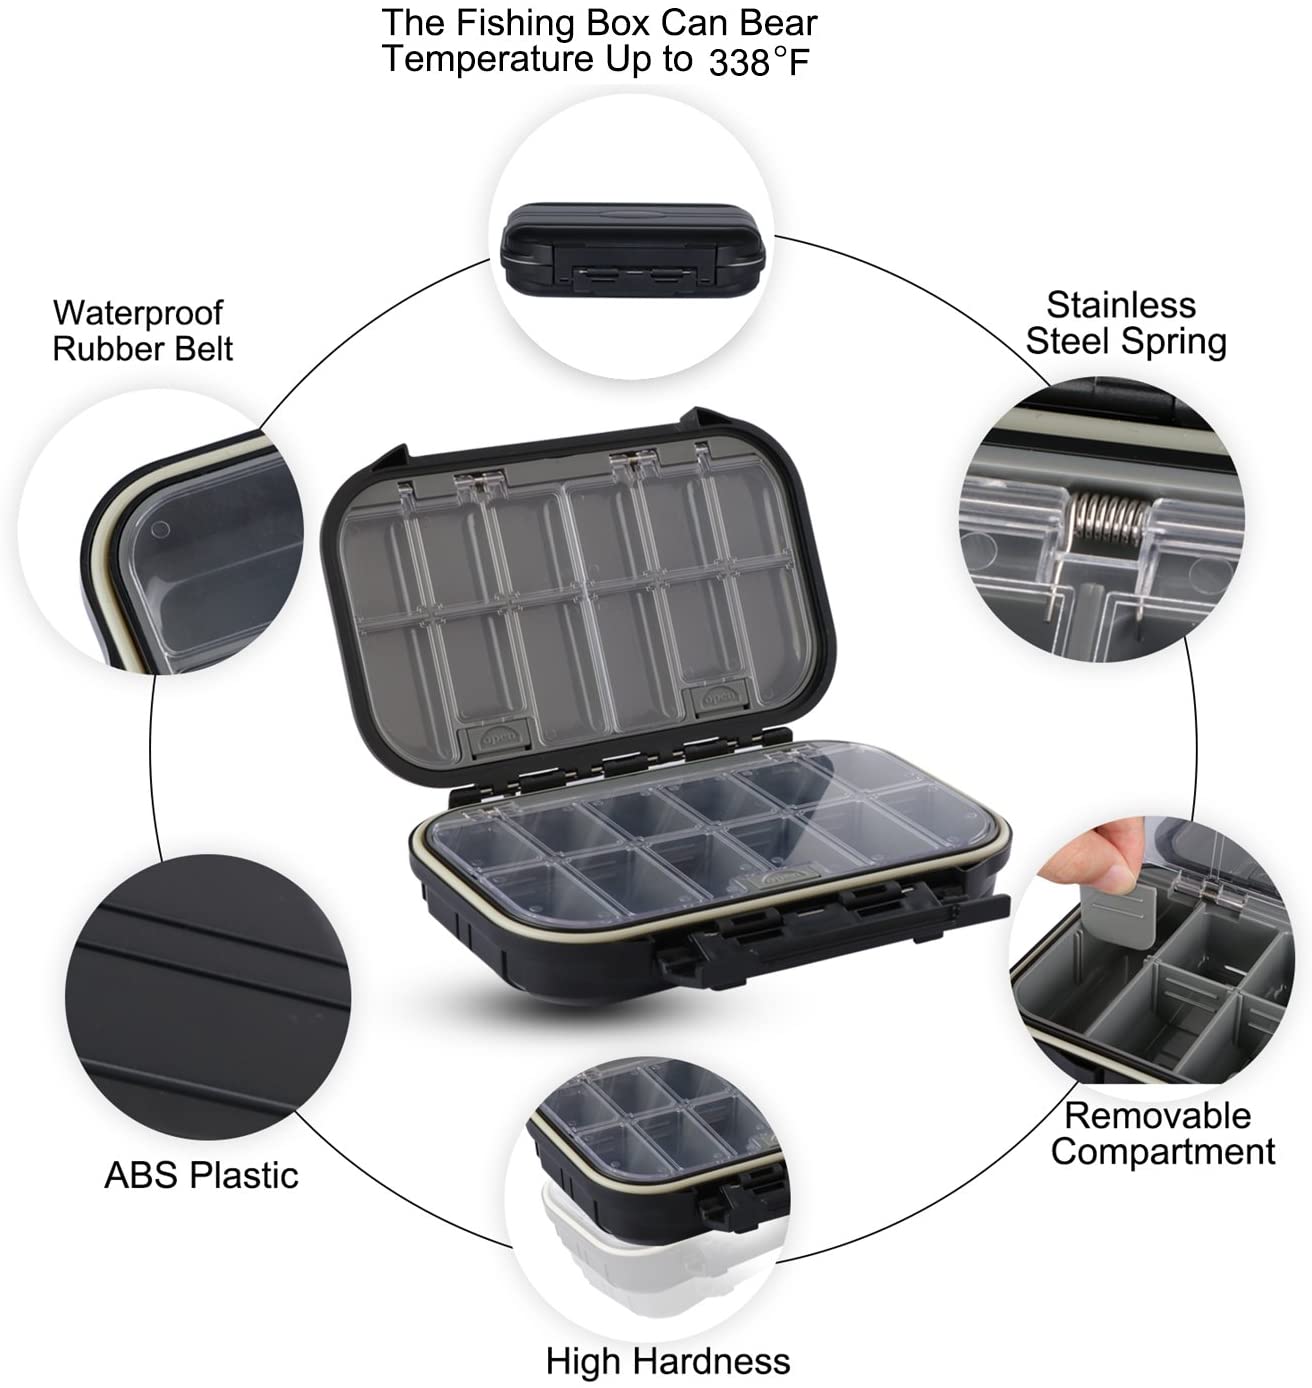 Goture Small Tackle Box, Black Waterproof 2 Sided Adjustable Fishing Lure  Tackle Boxes - Small